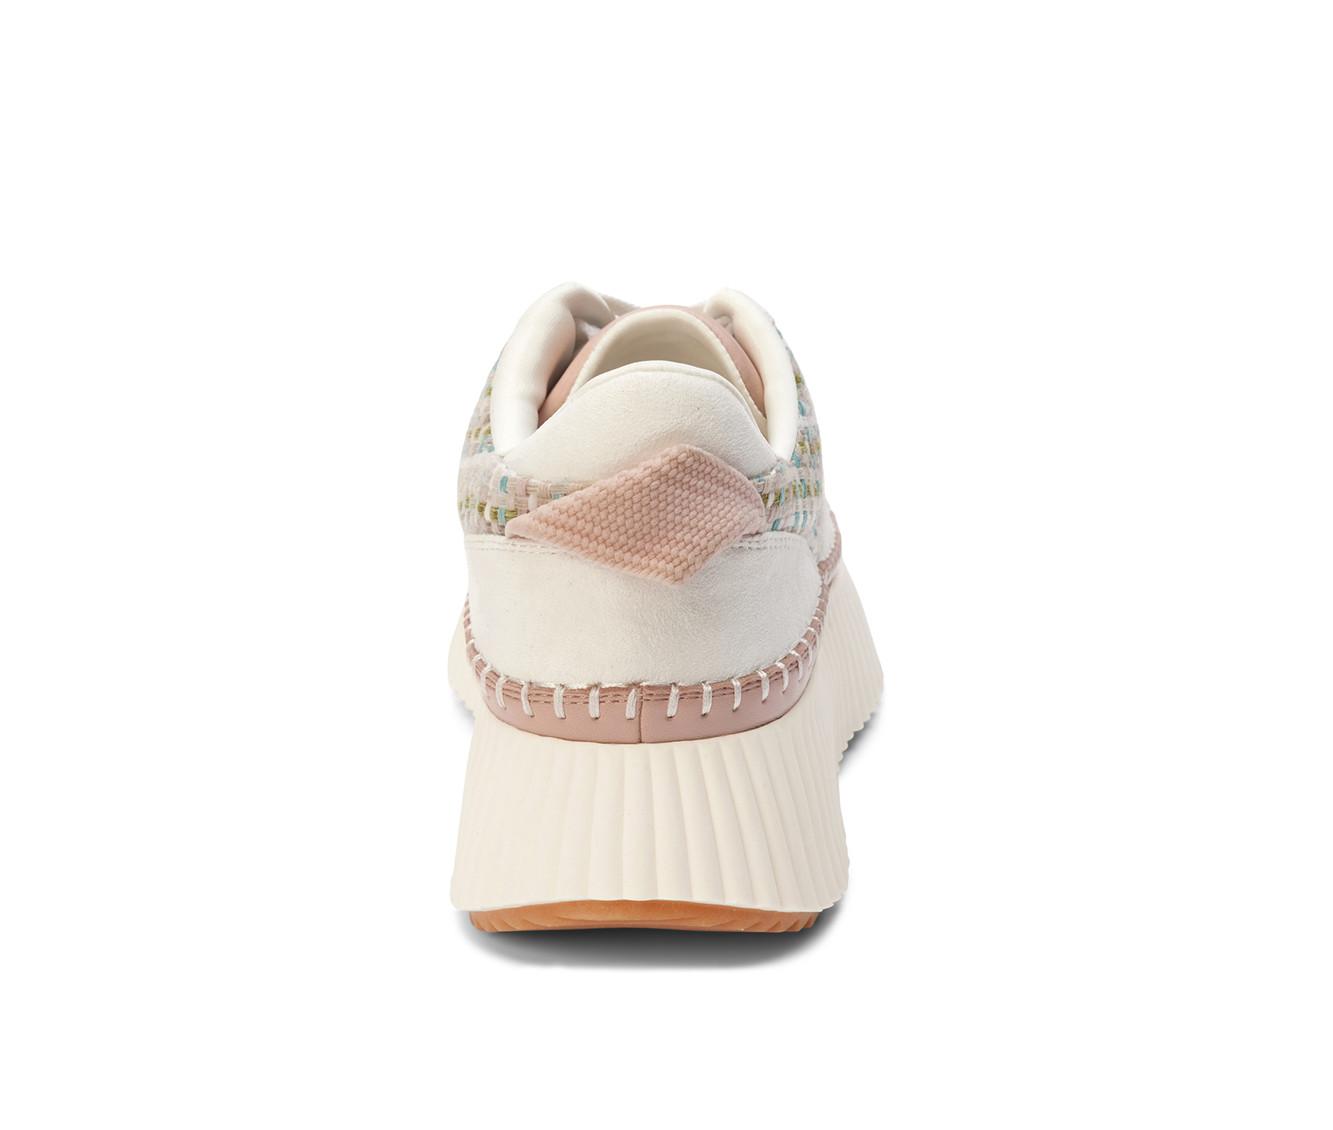 Women's Coconuts by Matisse Go To Wedge Fashion Sneakers